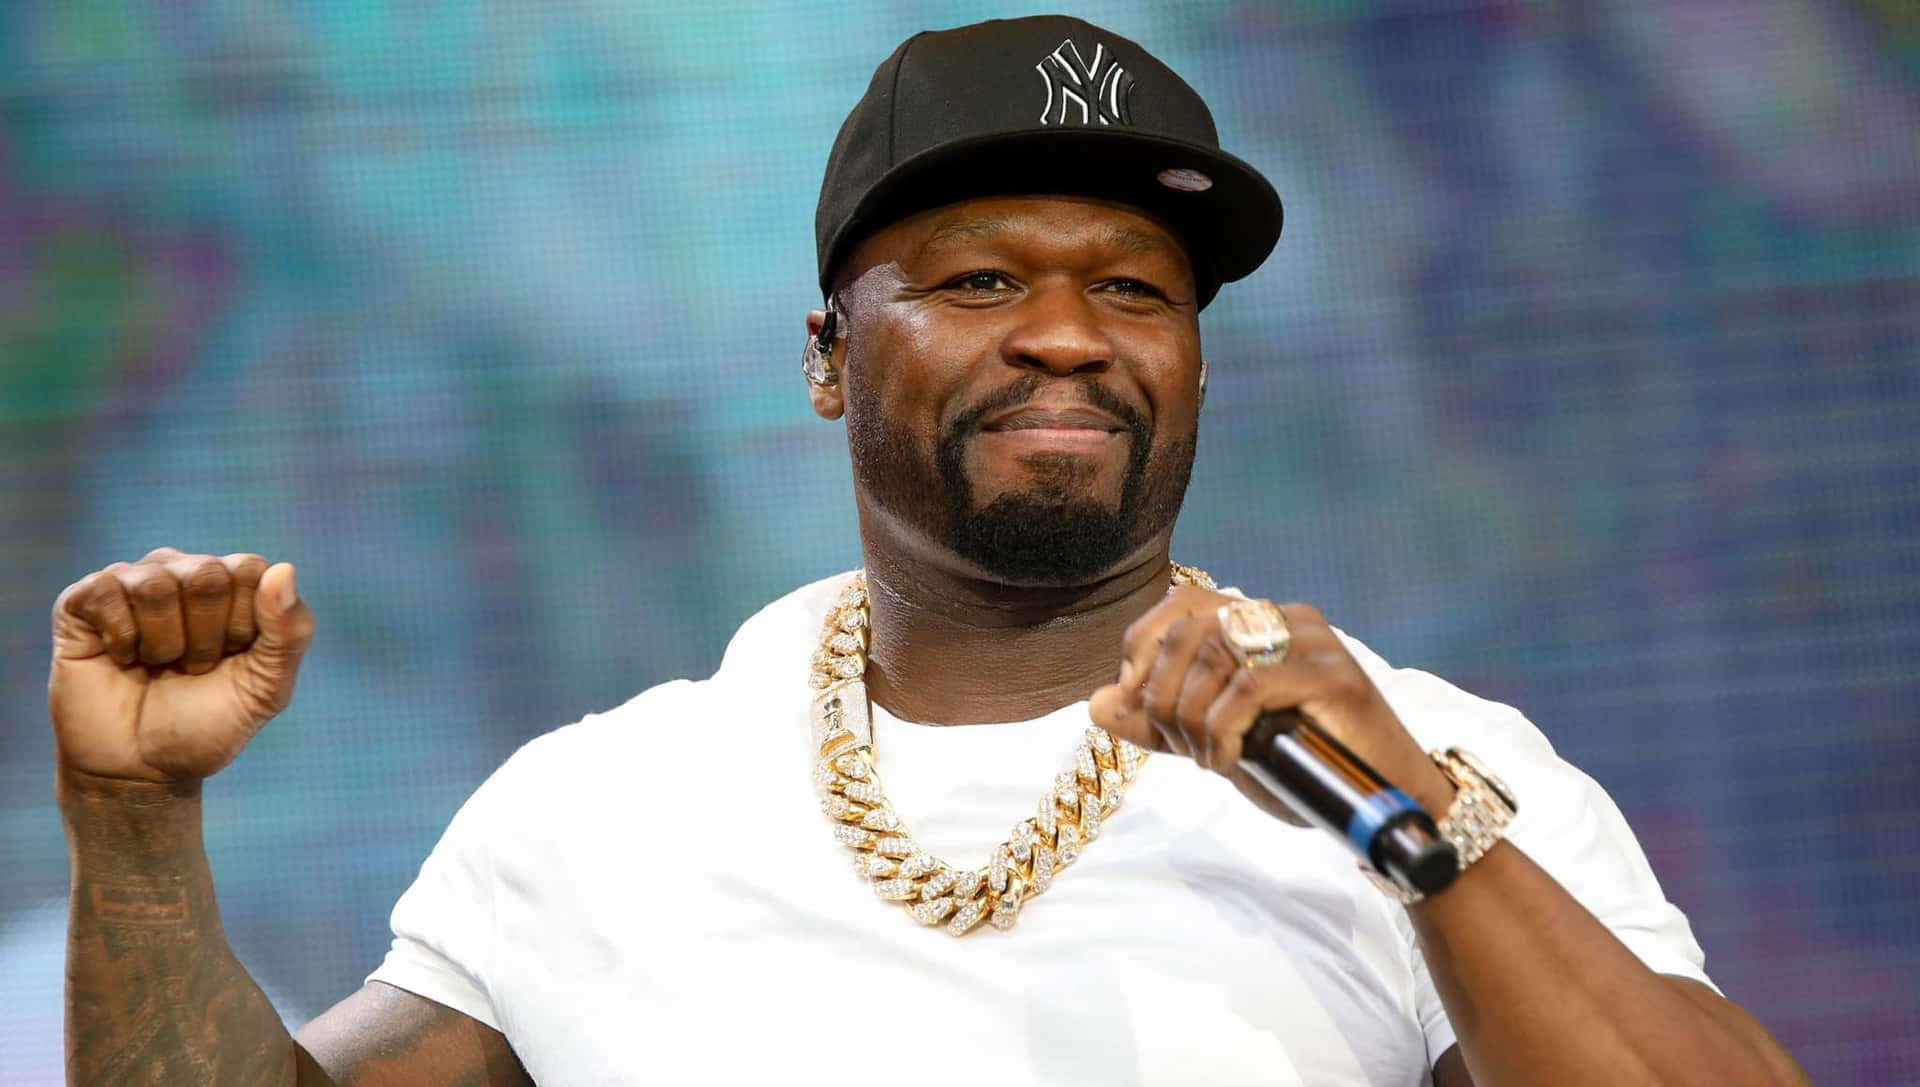 Rapper 50 Cent energetic performance